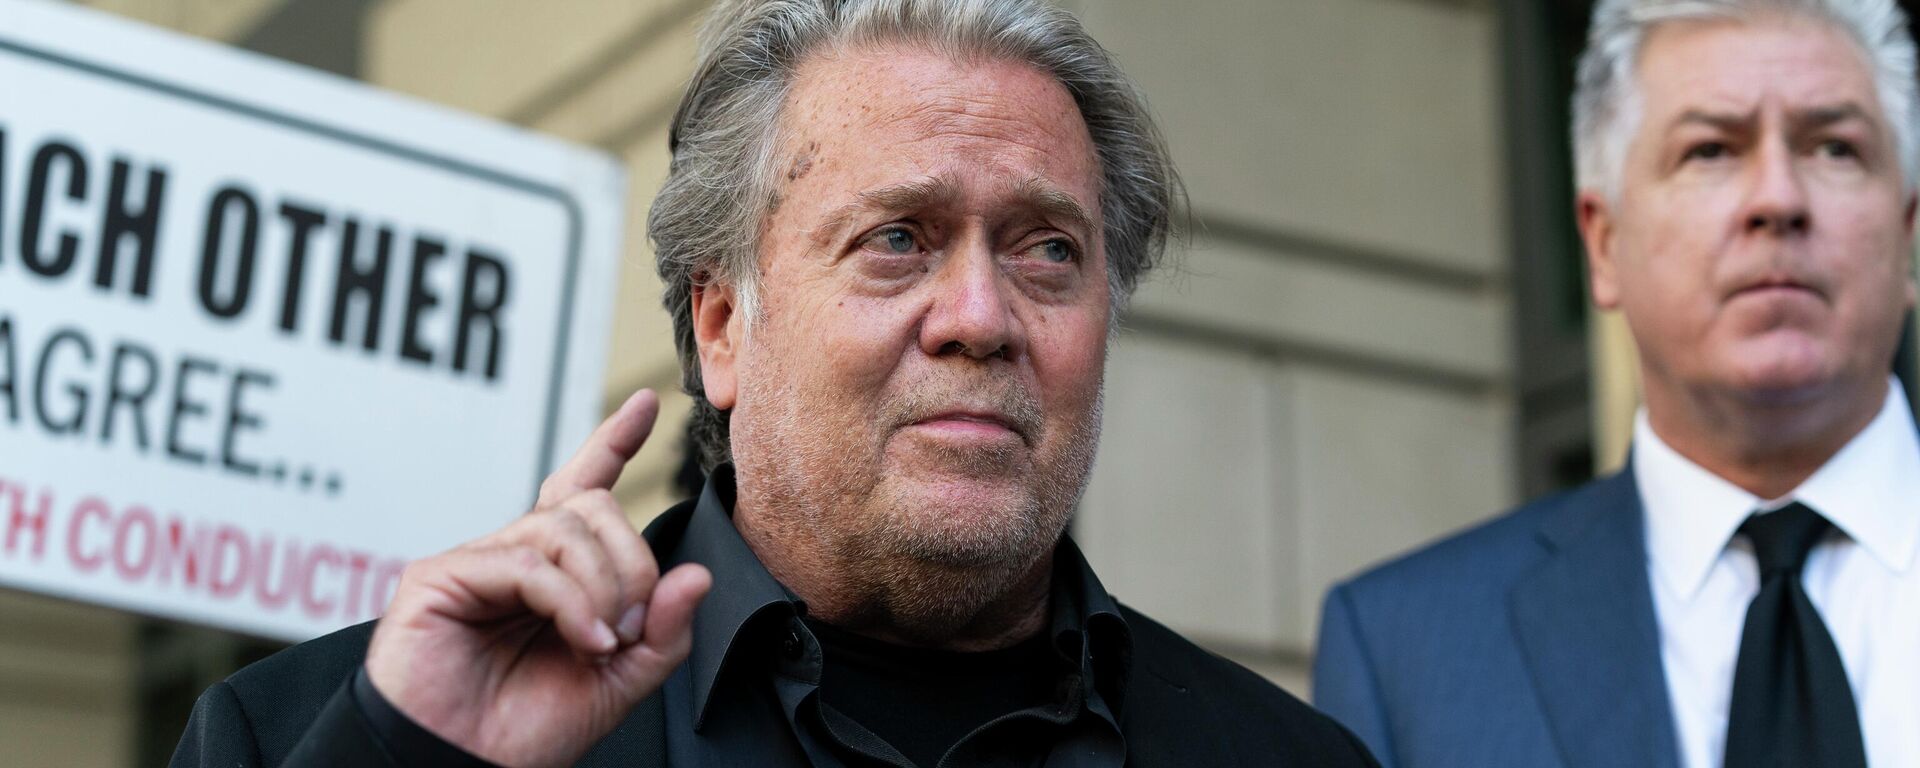 Former White House strategist Steve Bannon, left, speaks with reporters as he departs federal court on Friday, July 22, 2022, in Washington, with his attorney M. Evan Corcoran, right. Bannon, a longtime ally of former President Donald Trump has been convicted of contempt charges for defying a congressional subpoena from the House committee investigating the Jan. 6 insurrection at the U.S. Capitol. - Sputnik International, 1920, 24.07.2022